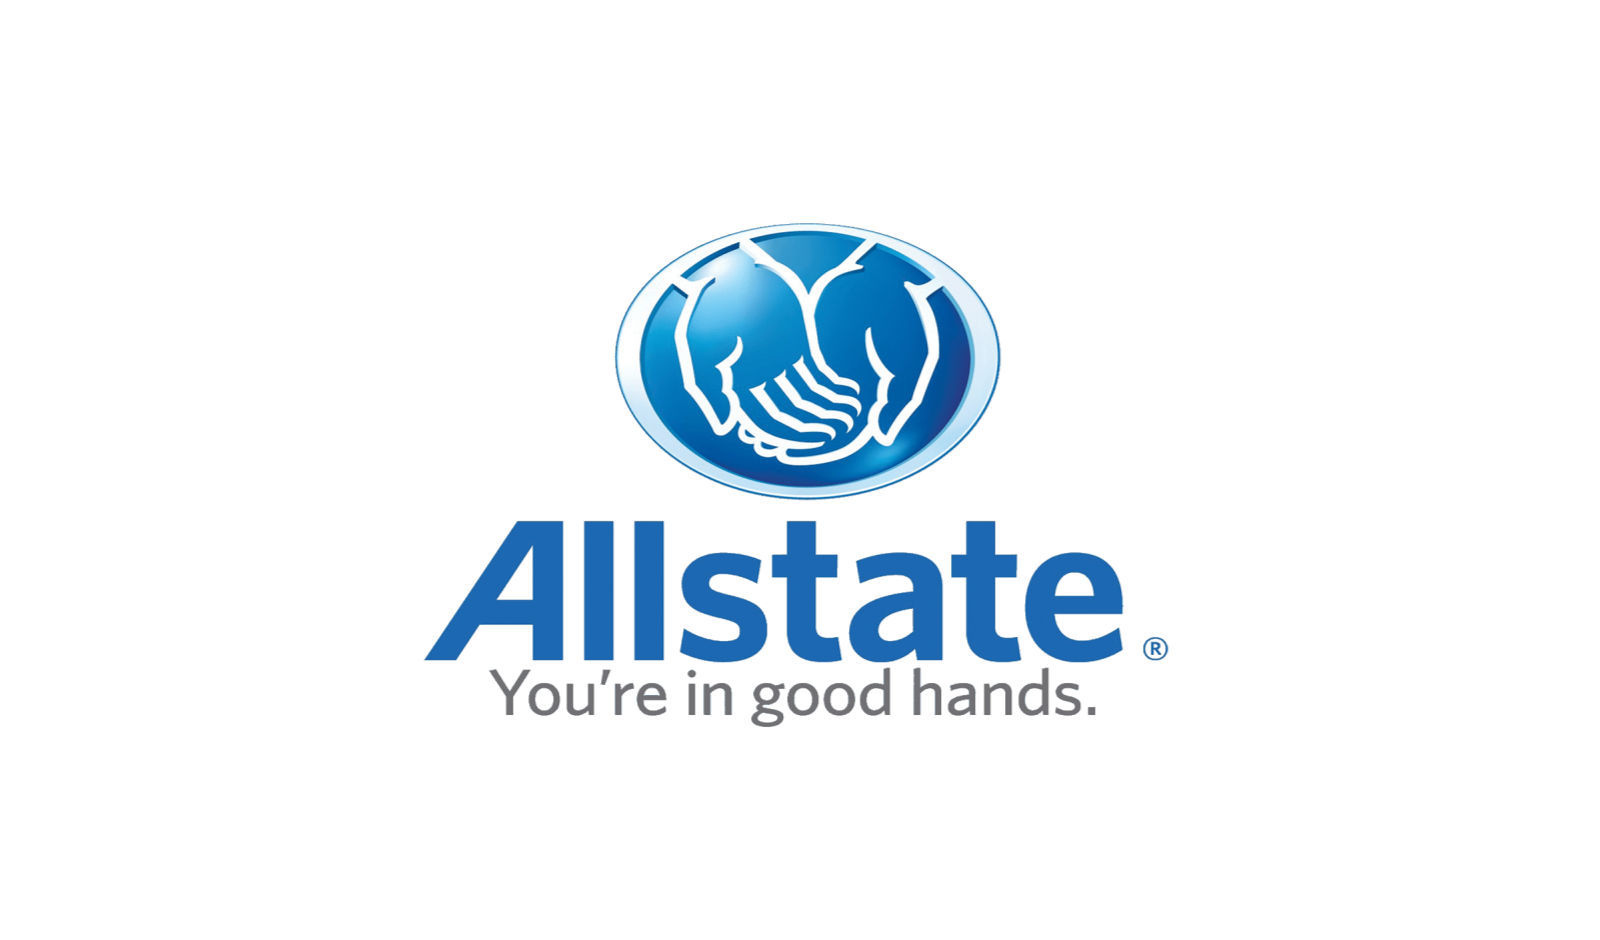 Allstate To Lay Off 3,800 Workers Amid Restructuring